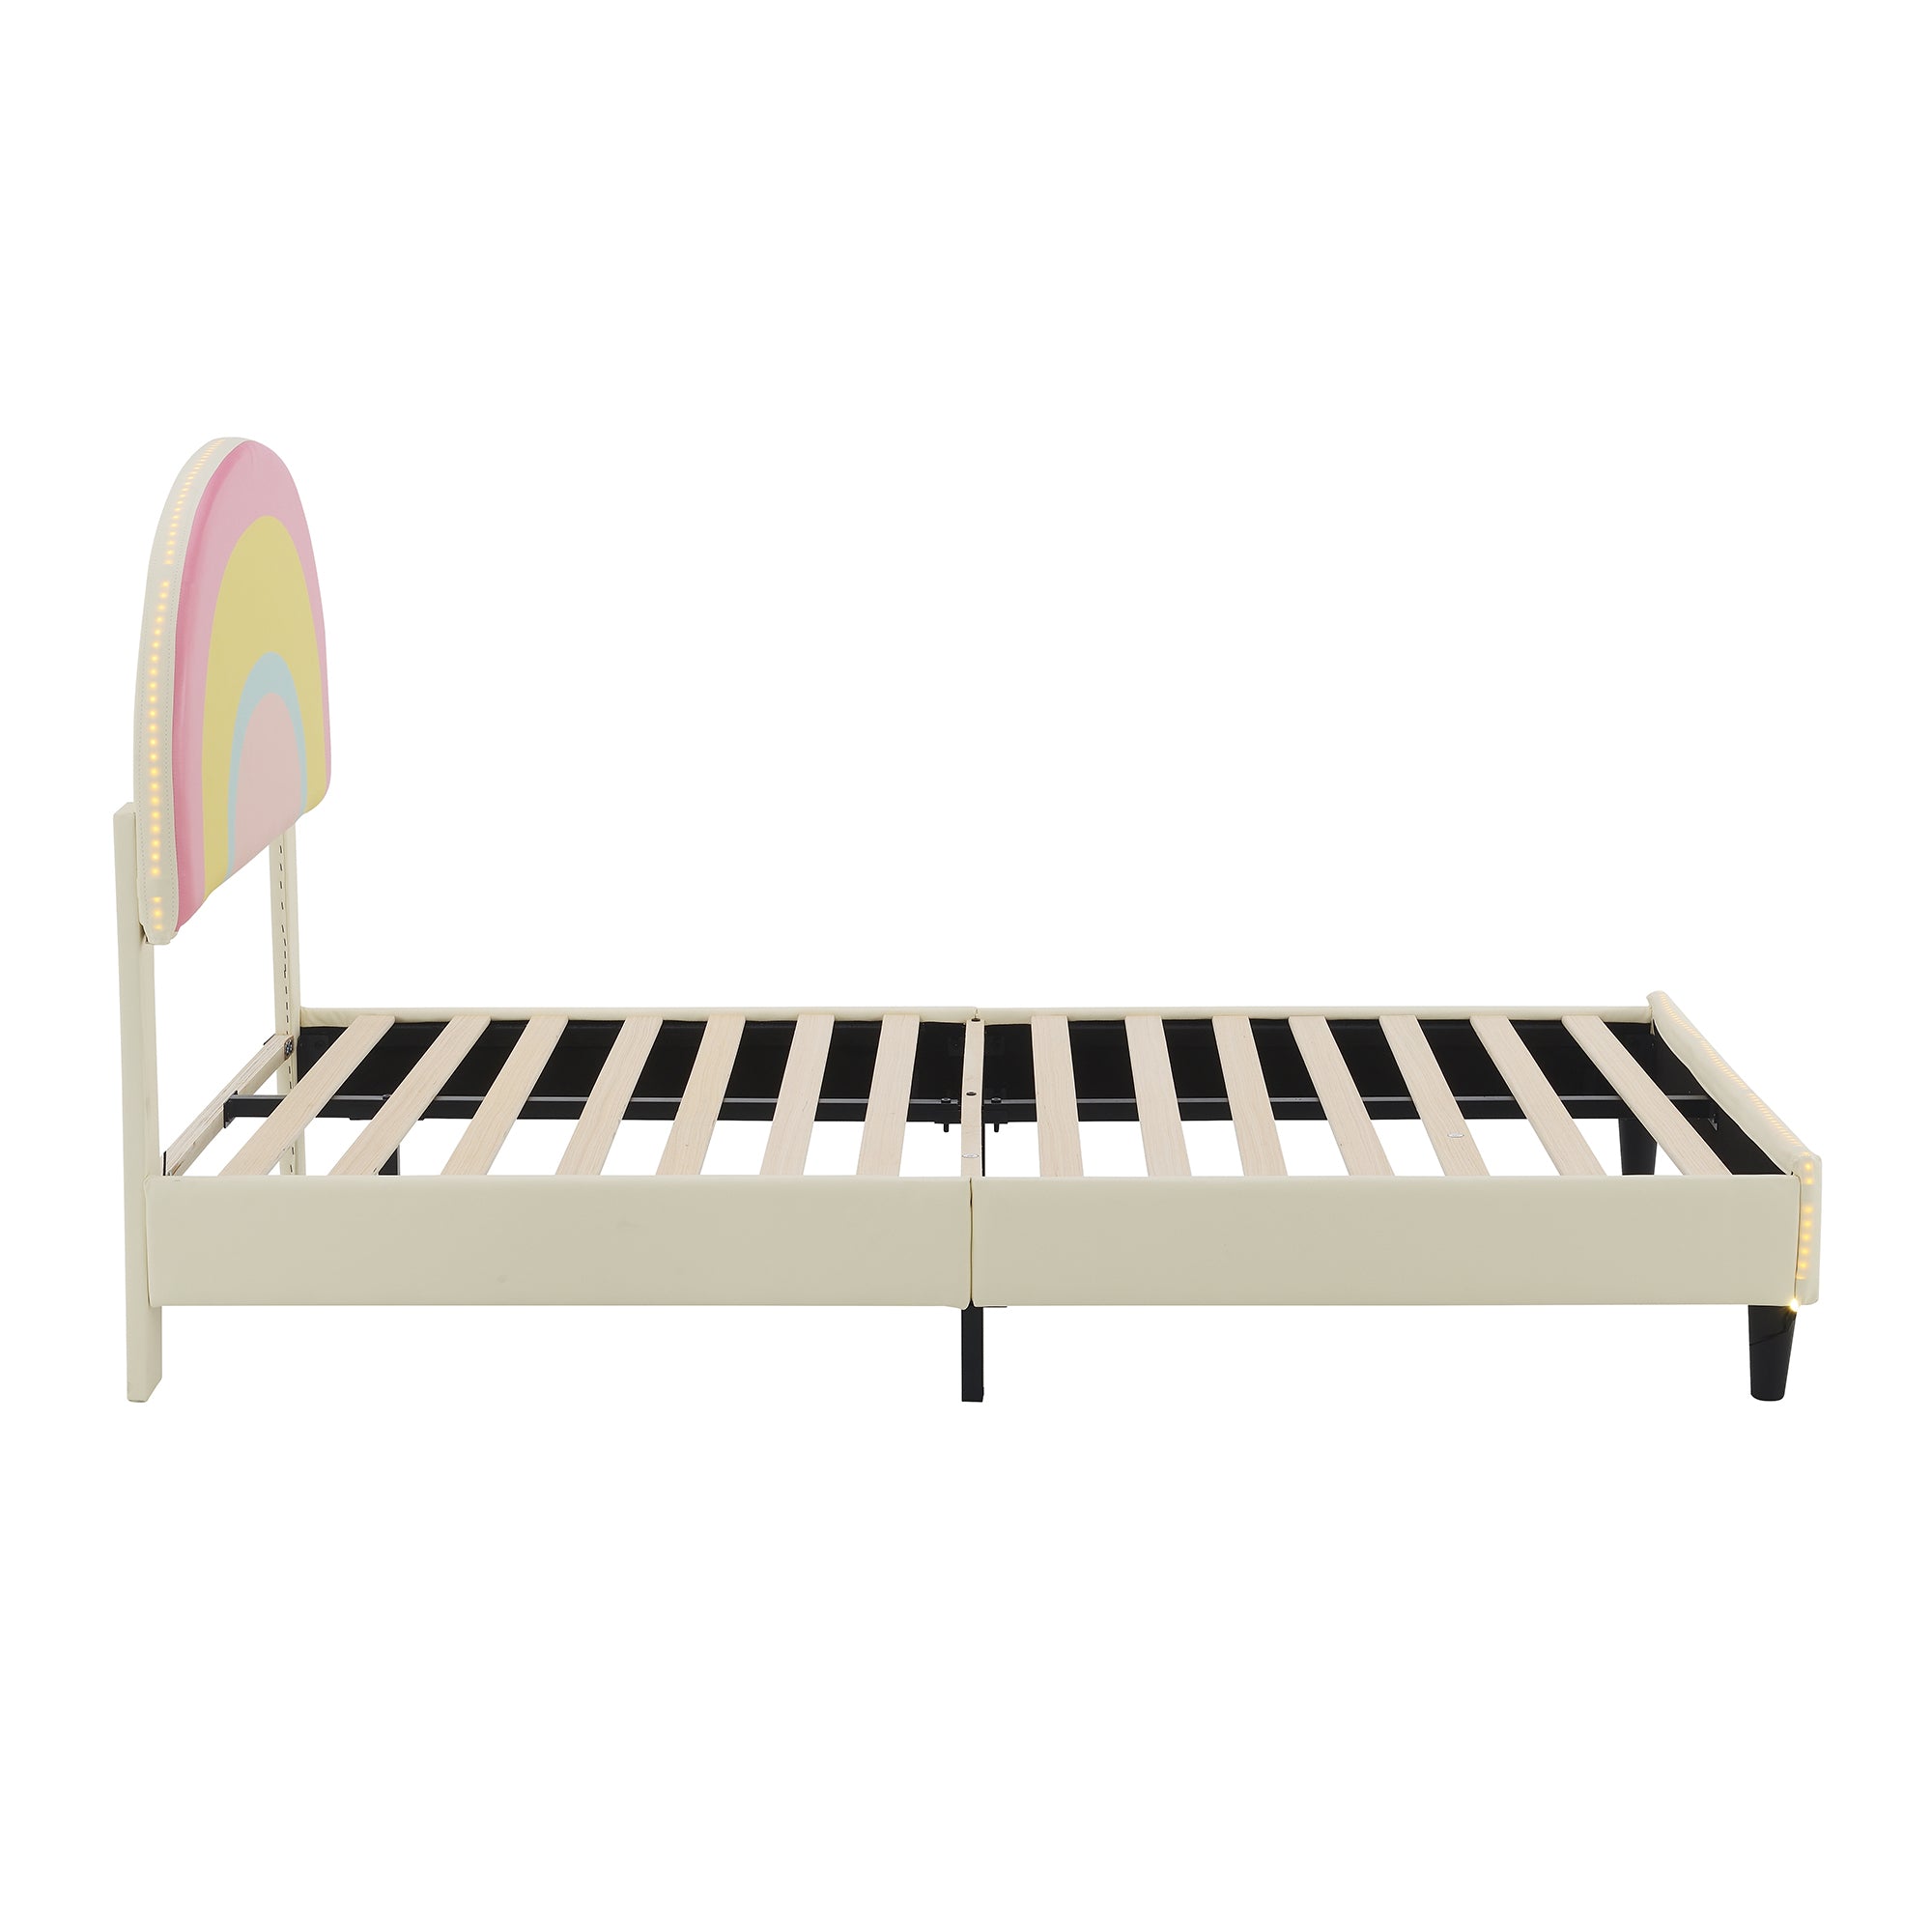 Twin Size Upholstered Platform Bed with Rainbow Shaped beige-upholstered